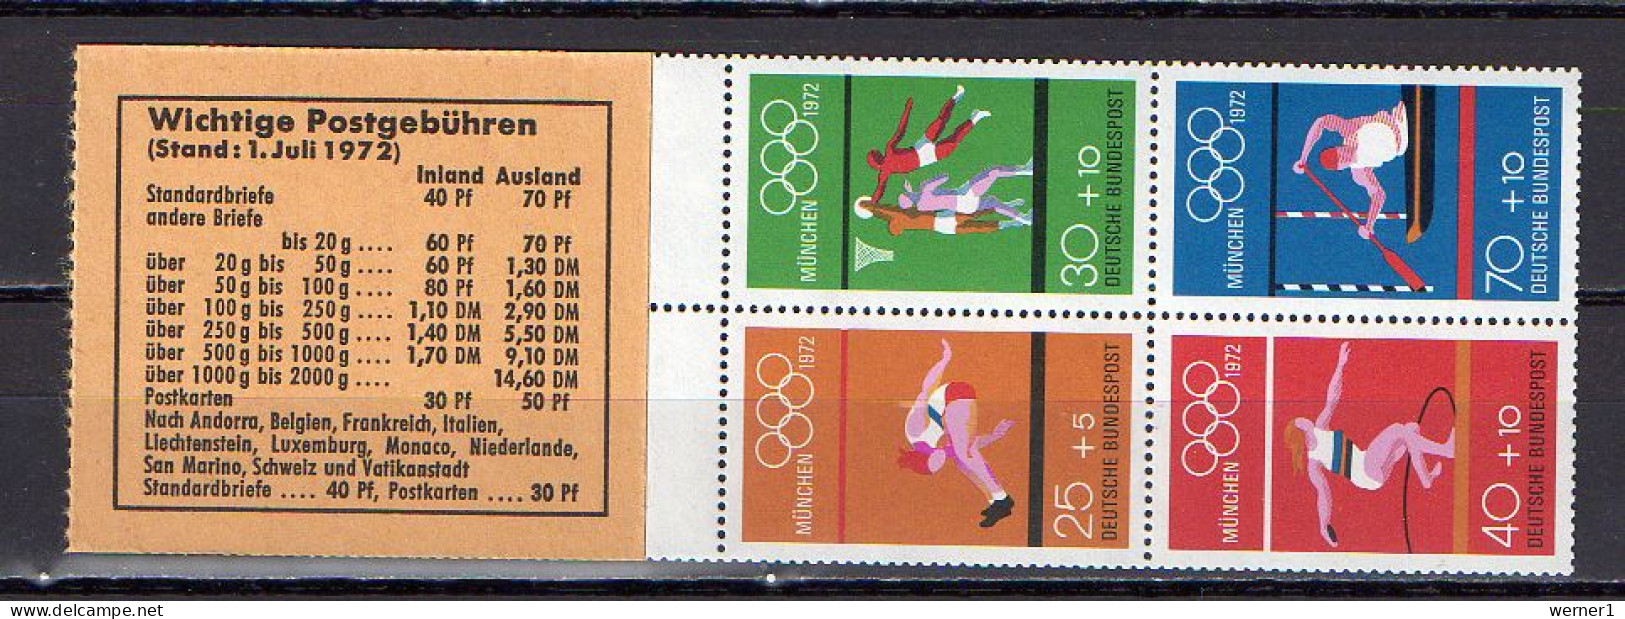 Germany 1972 Olympic Games Munich, Basketball, Rowing Etc. Stamp Booklet MNH - Ete 1972: Munich